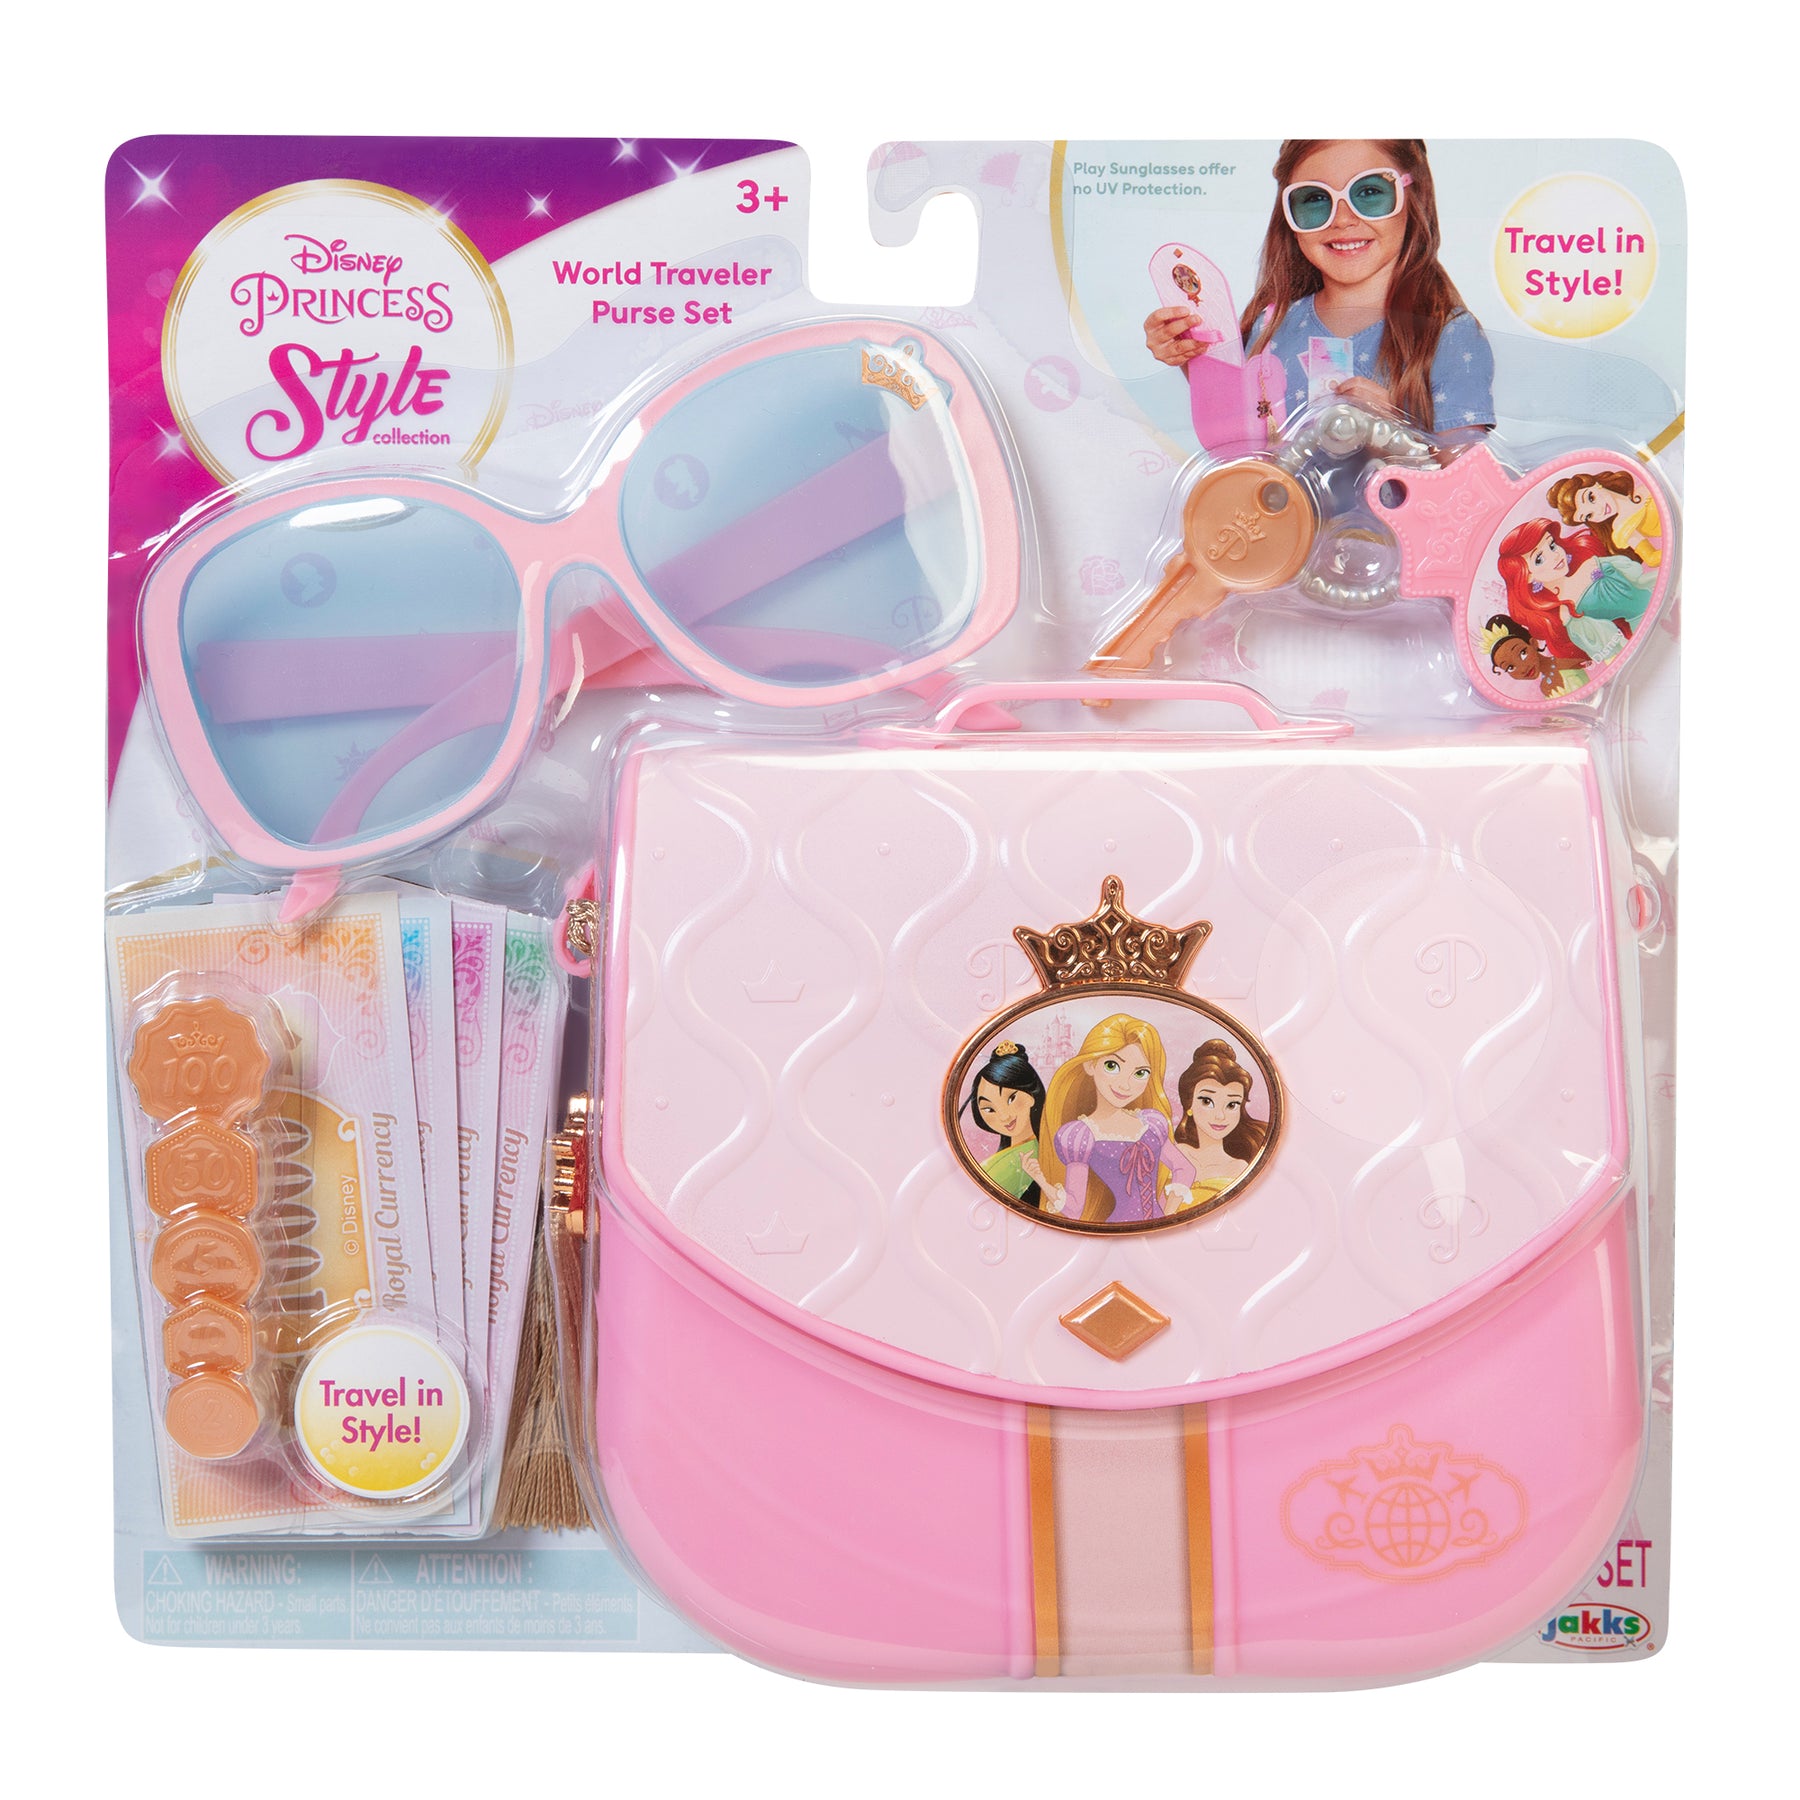 Little Girls Play Purse Set – 15pcs My First Princess Purse with Pretend  Makeup Toys, Bracelets, Toy Phone, Sunglasses, Credit Card, Lipstick,  Birthday for Toddler Girls – BigaMart